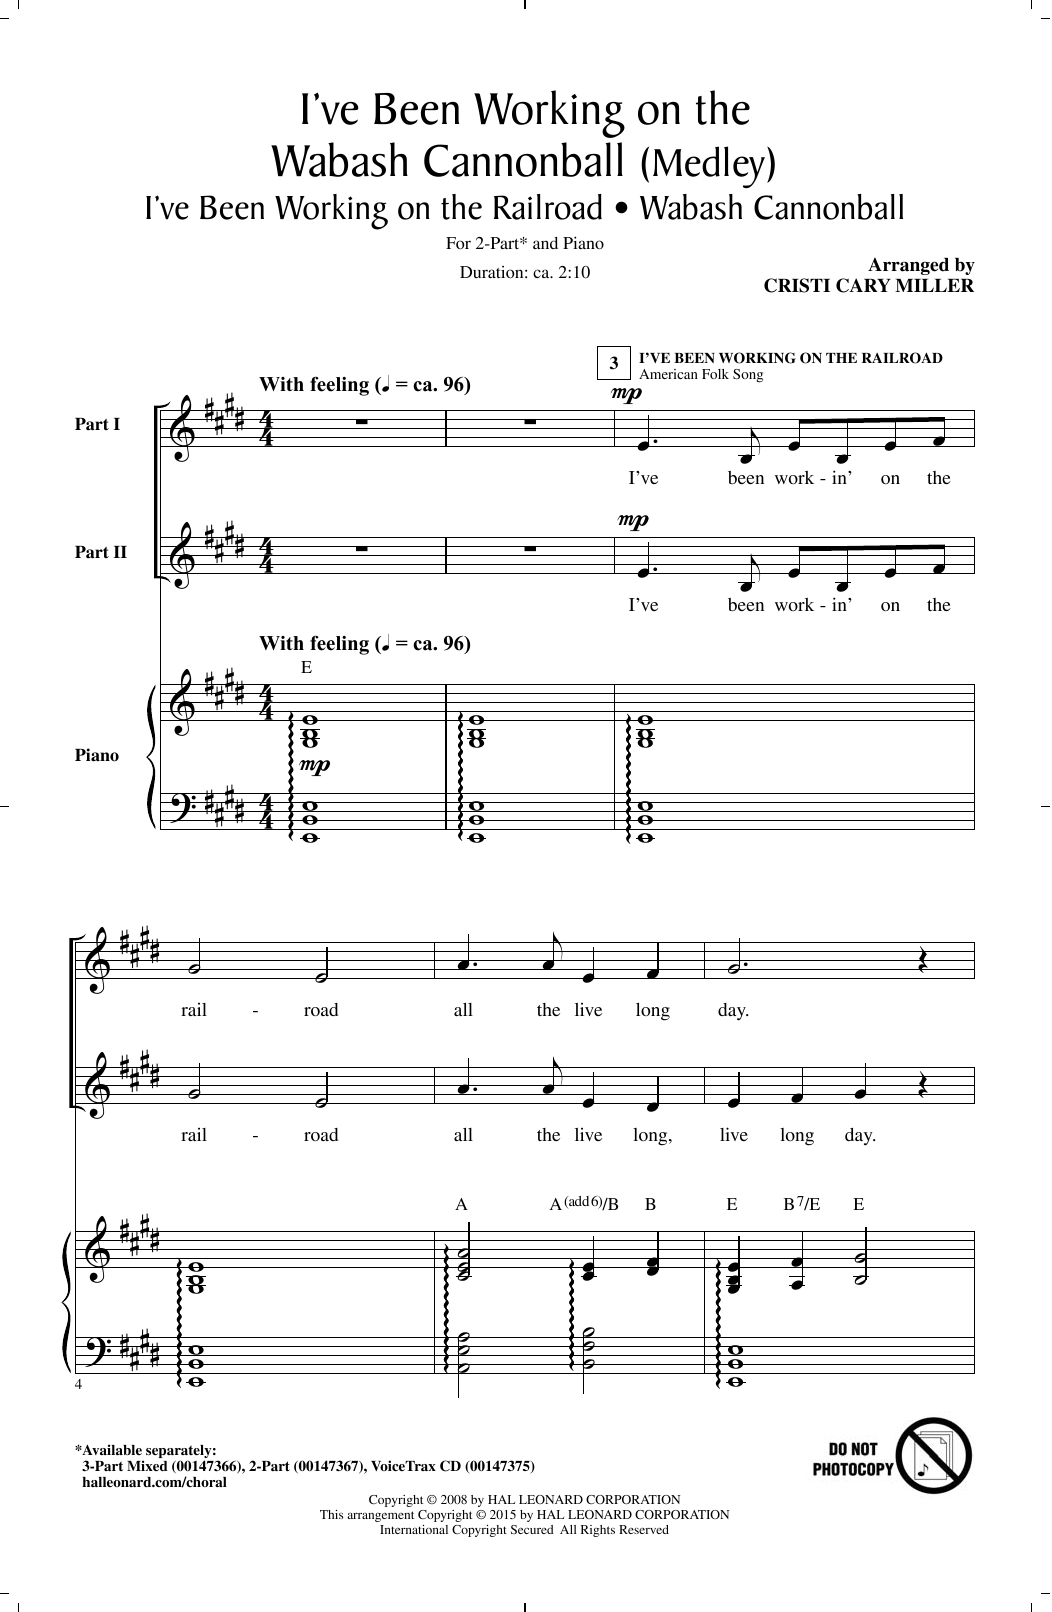 Download Cristi Cary Miller I've Been Working On The Wabash Cannonb Sheet Music